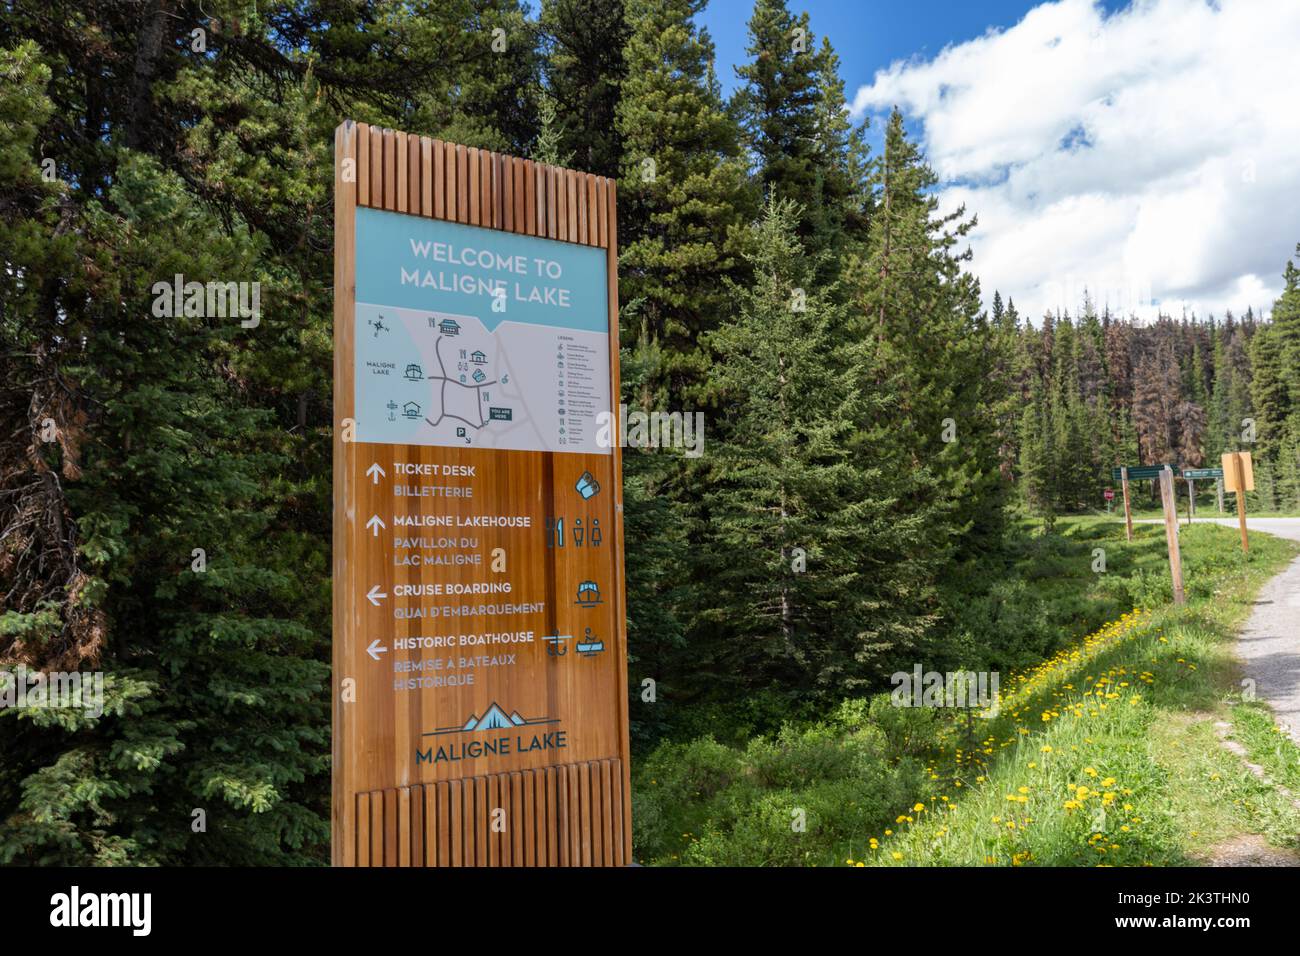 Jasper, Alberta, Canada - July 13, 2022: Sign and map to welcome visitors to Maligne Lake in Jasper National Park Stock Photo